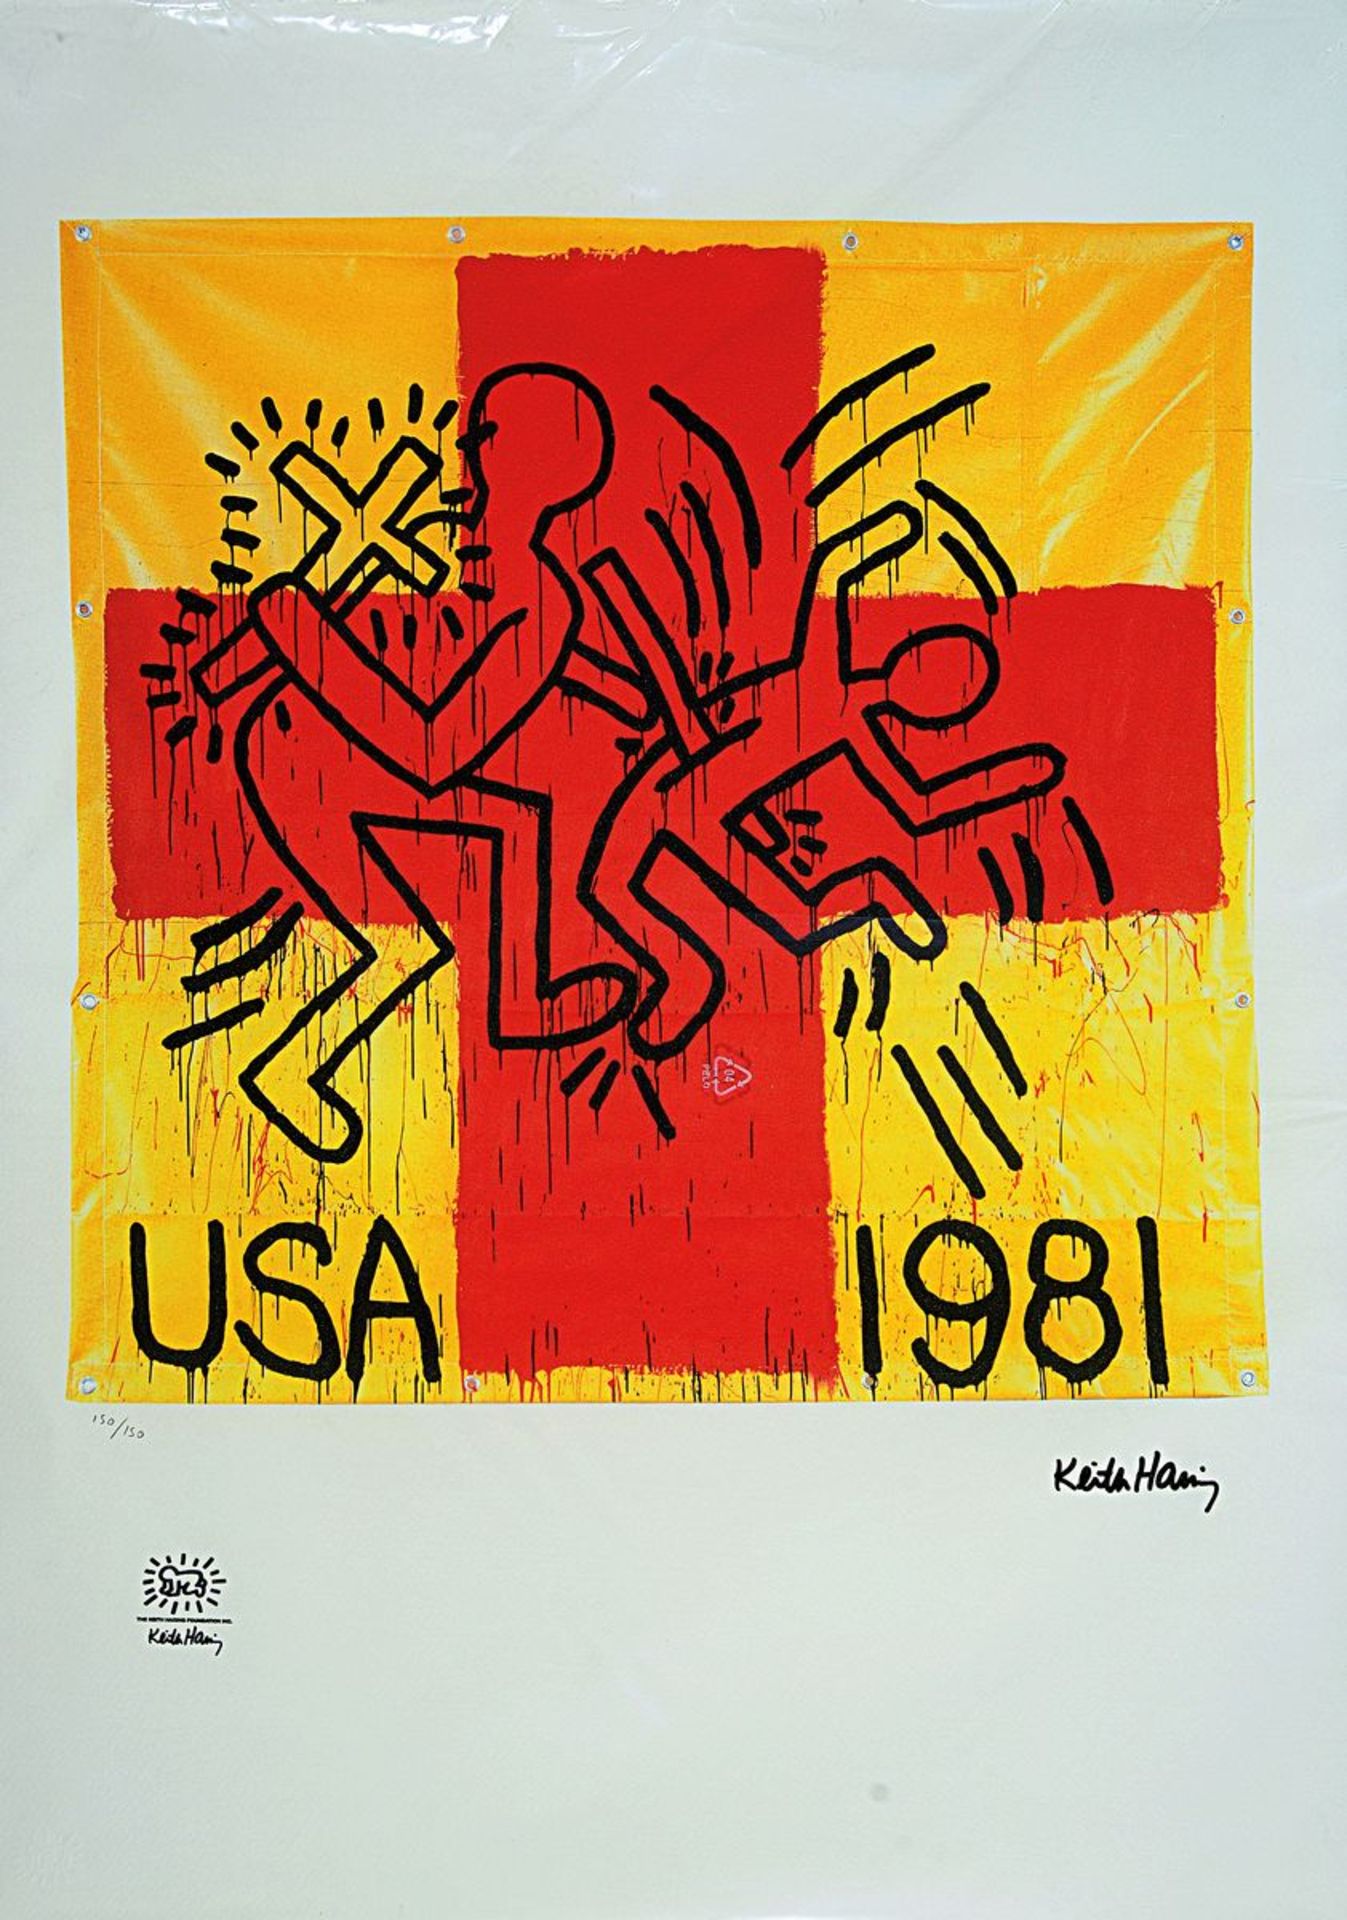 Nach Keith Haring (1958-1990), Lithographie, 'USA 1981',